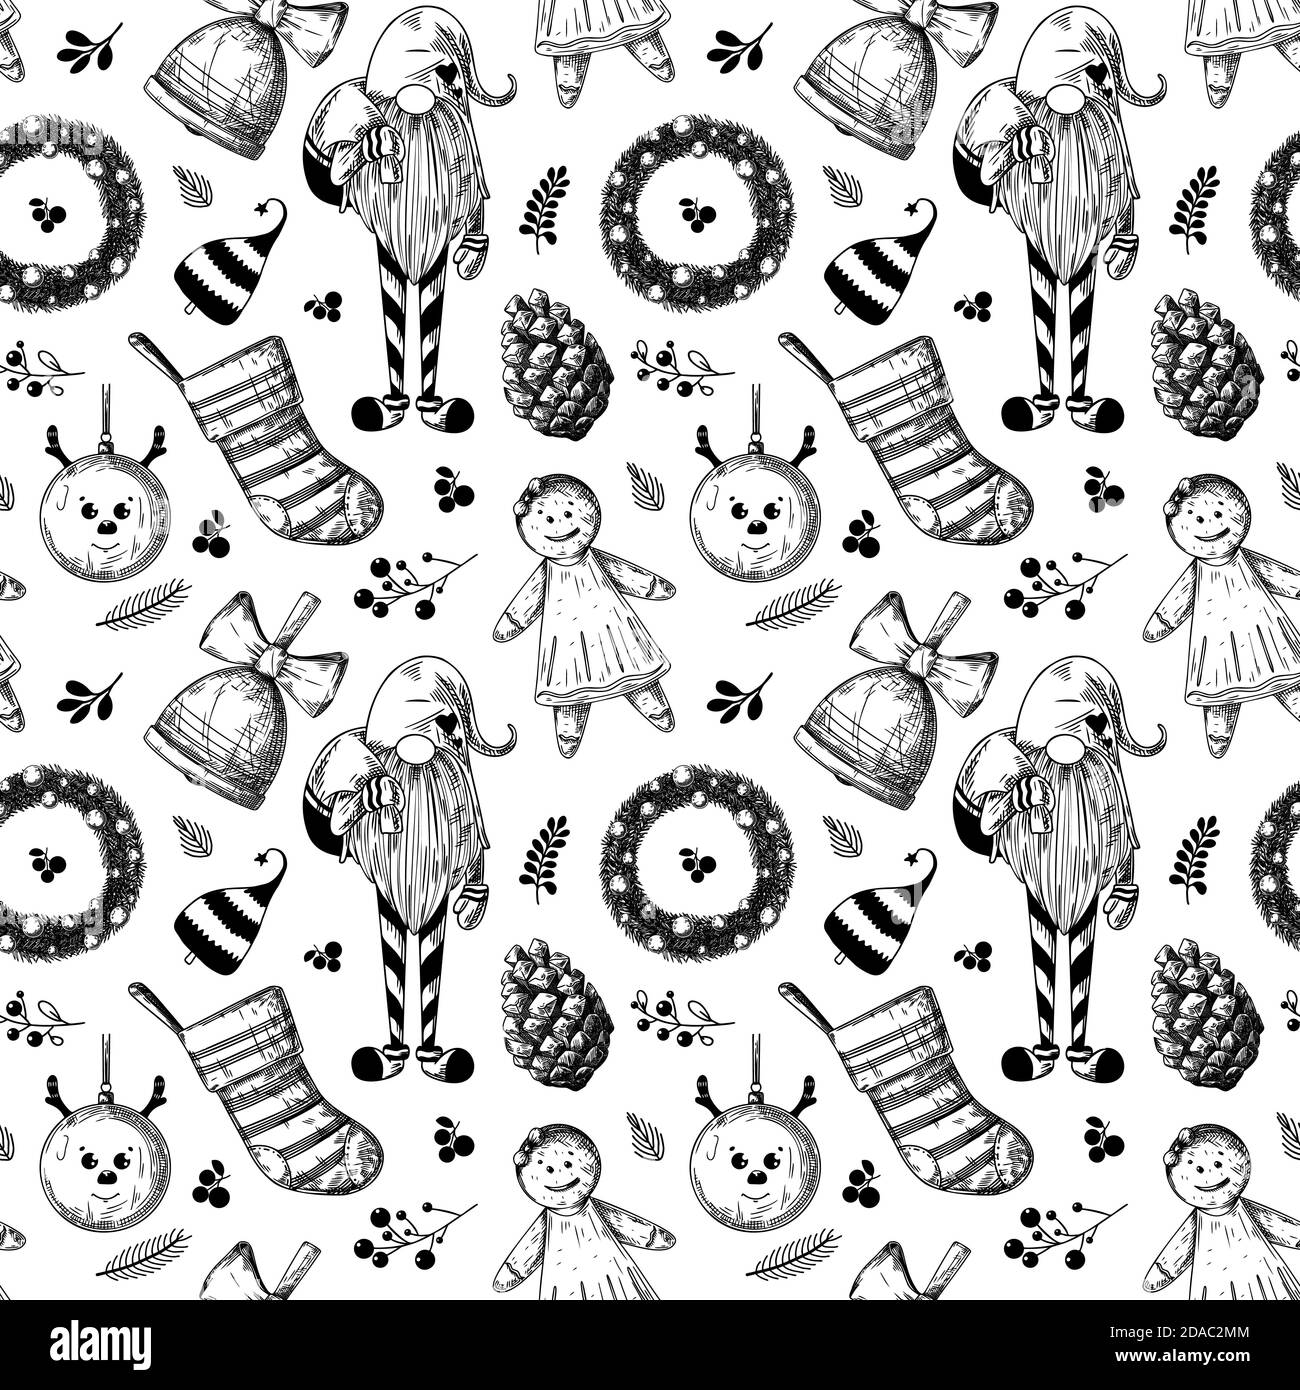 Christmas seamless pattern. Toys, snowman, wreath and other Christmas elements. Sketch vector Stock Vector